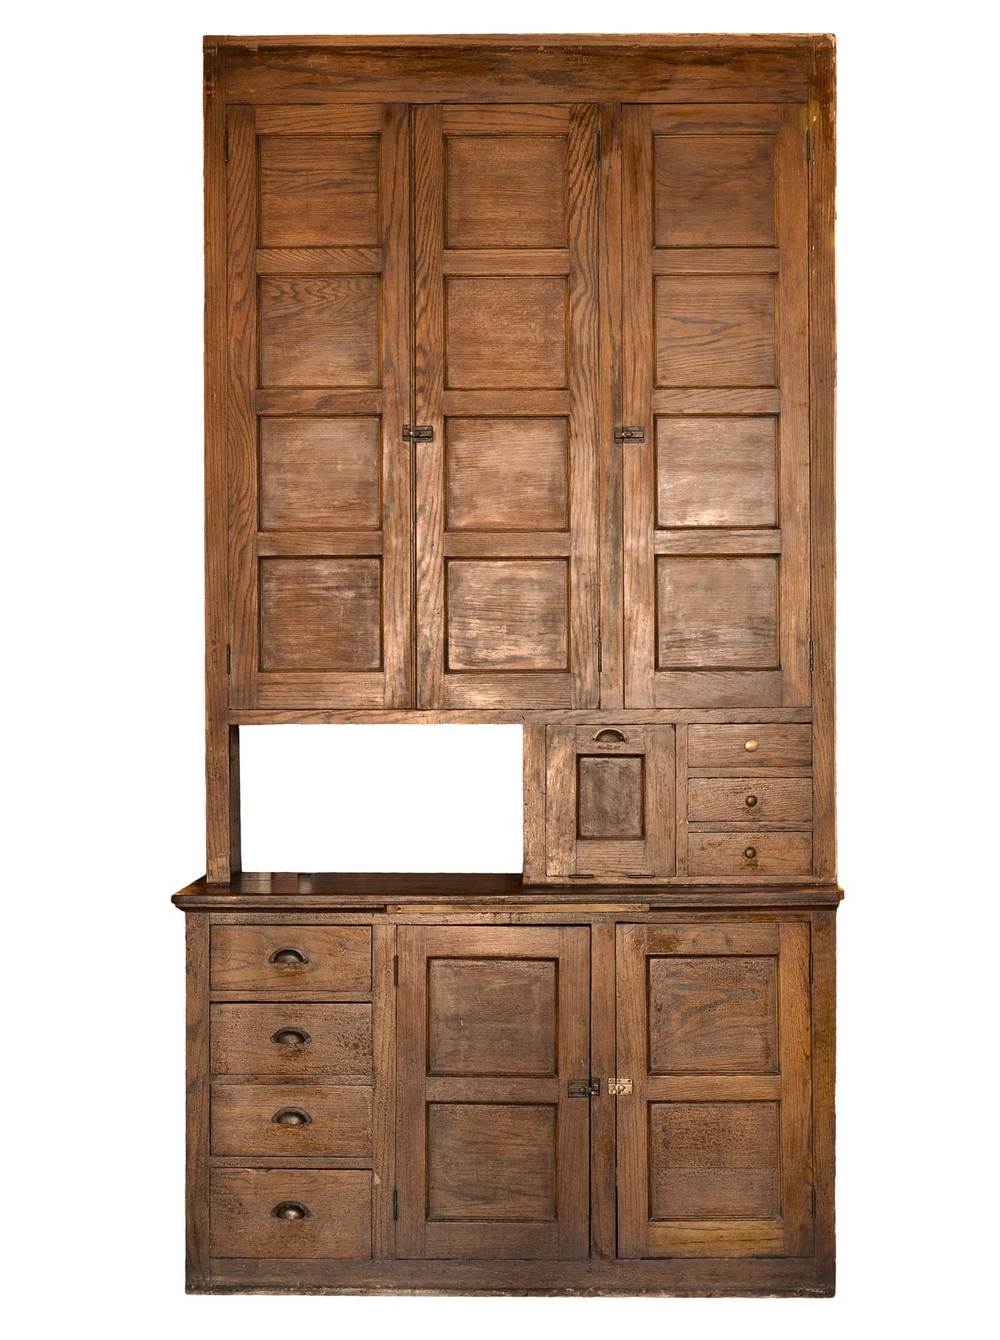 tall oak built-in kitchen cabinet — ARCHITECTURAL ANTIQUES